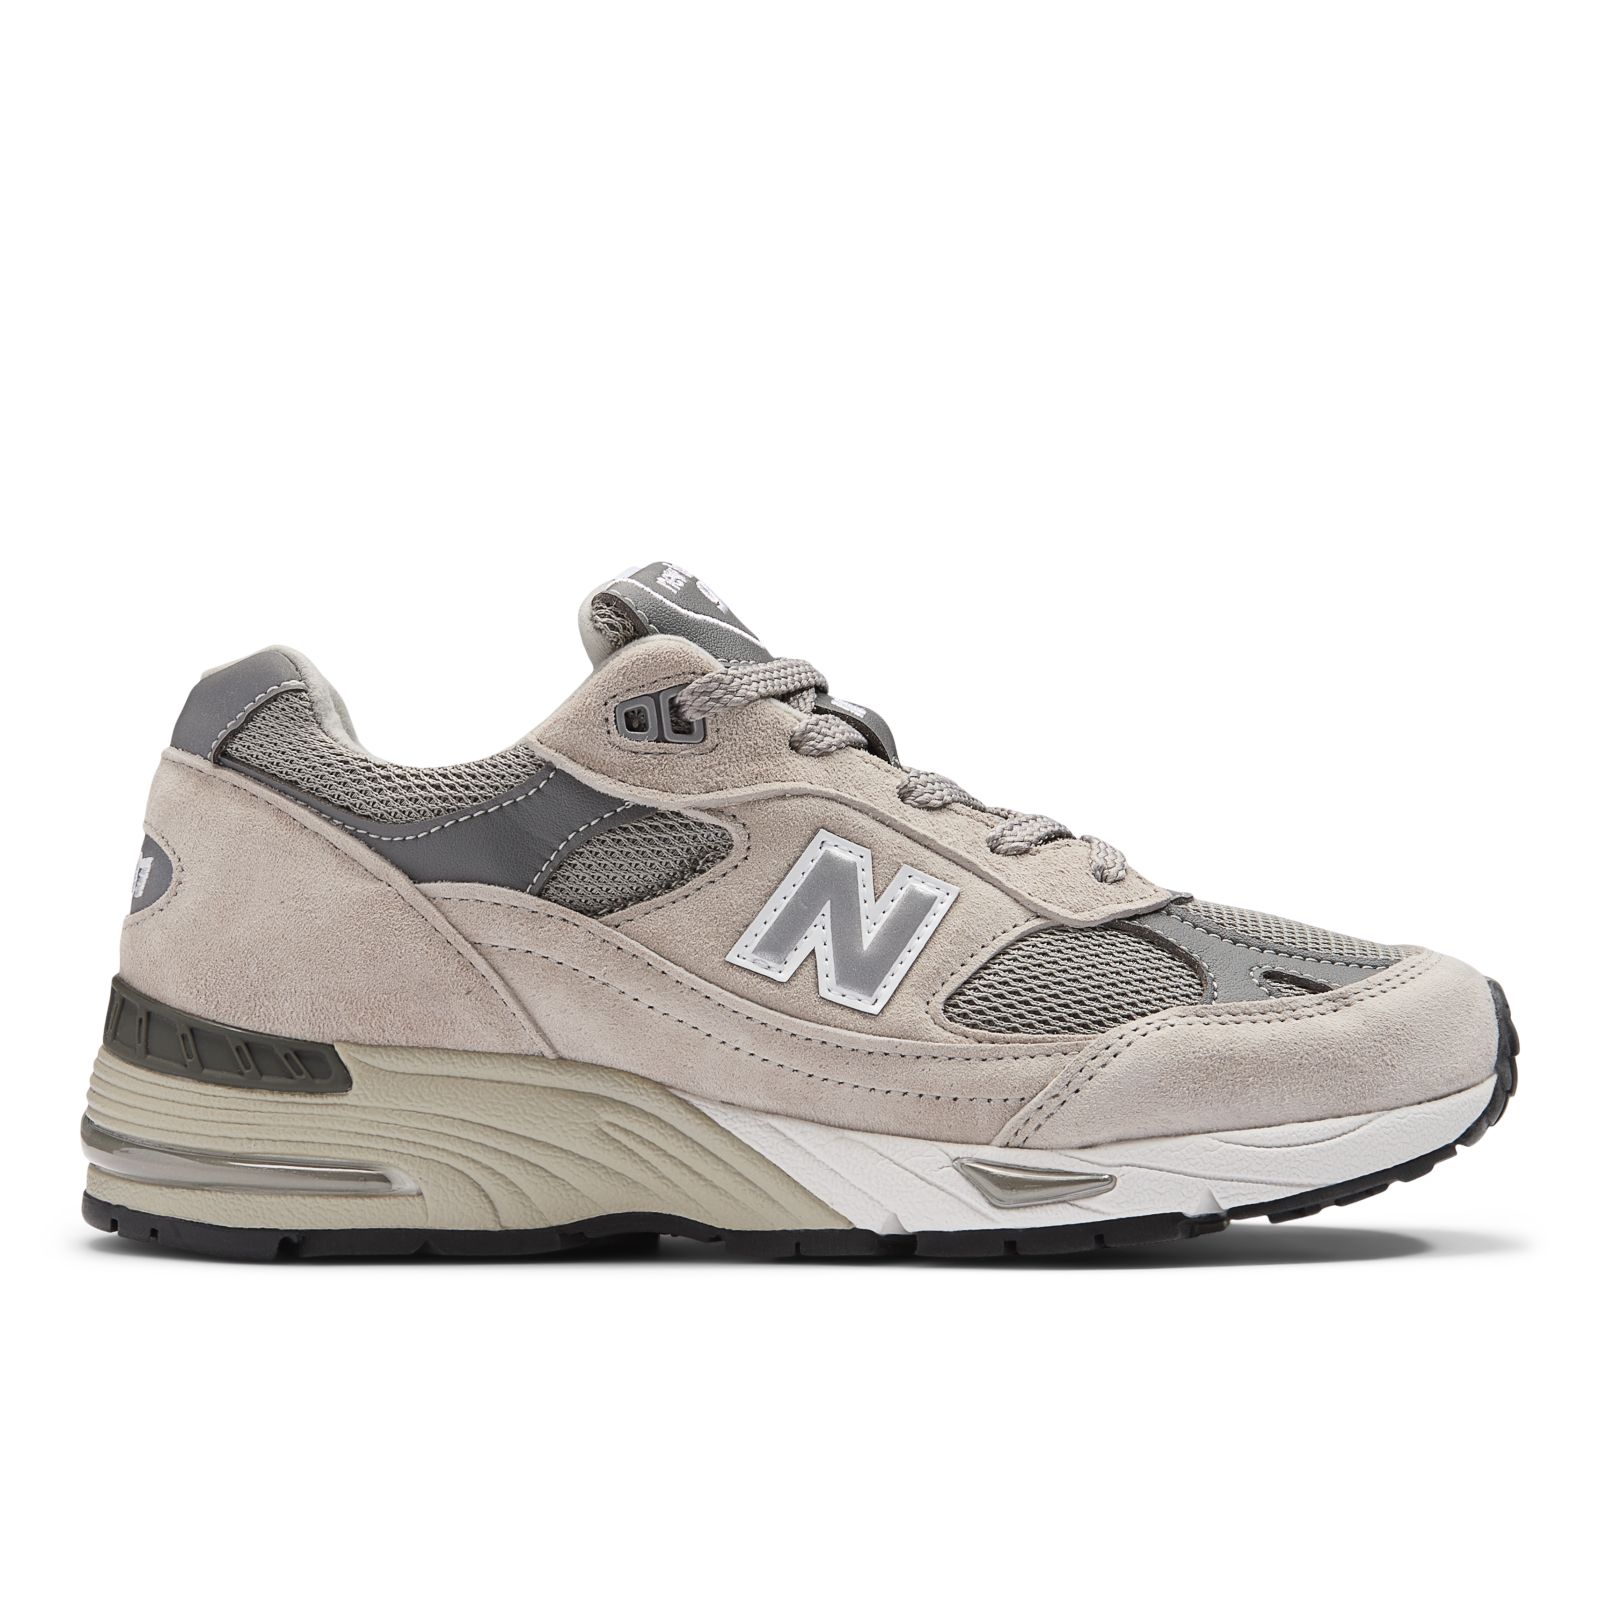 Women's Made in UK 991 Shoes - New Balance